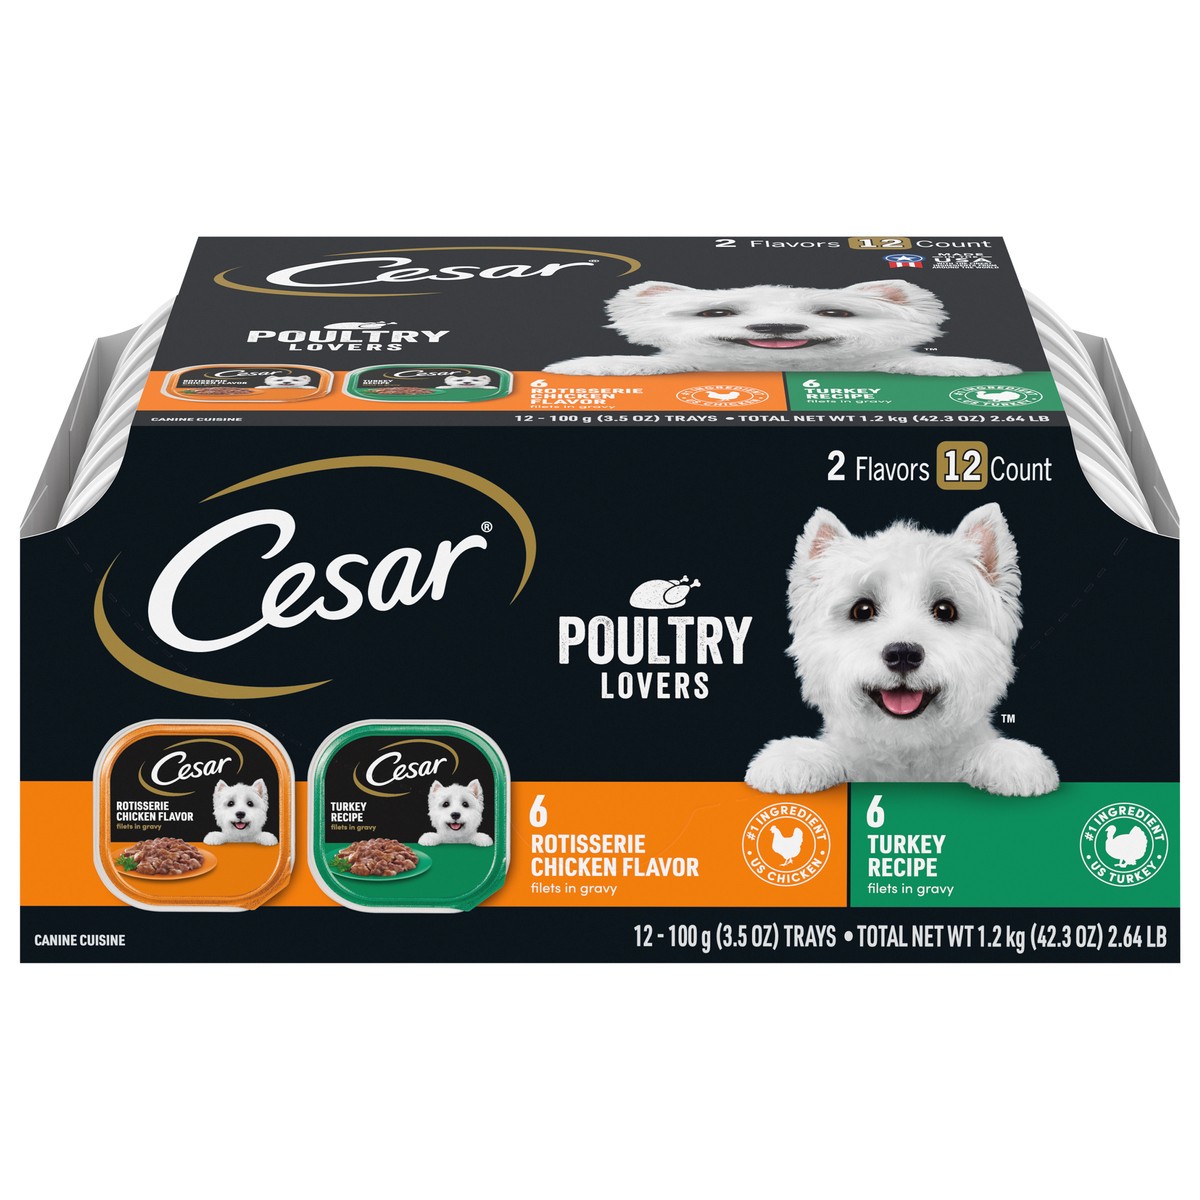 slide 1 of 15, Cesar Poultry Lovers Canine Cuisine 12 - 3.5 oz Trays, 12 ct